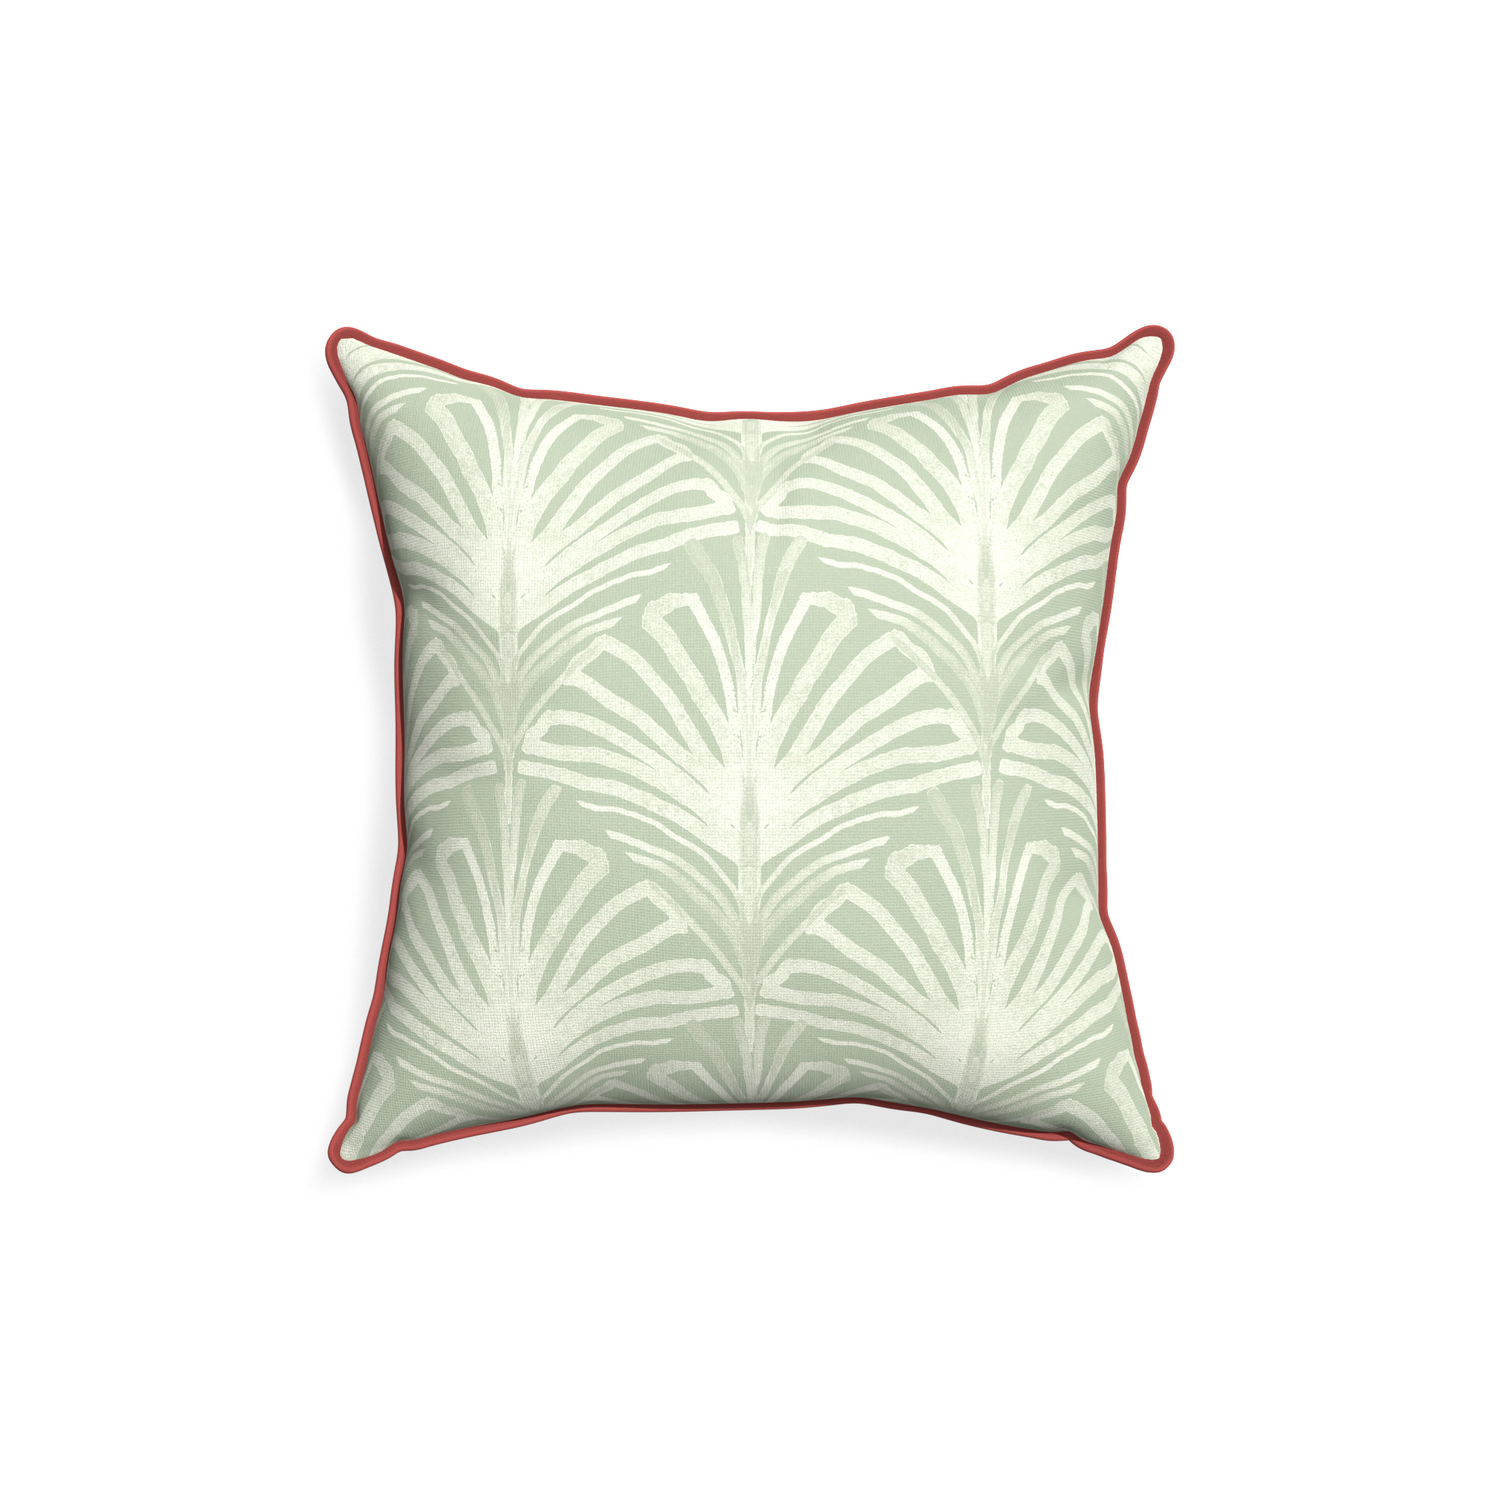 18-square suzy sage custom pillow with c piping on white background